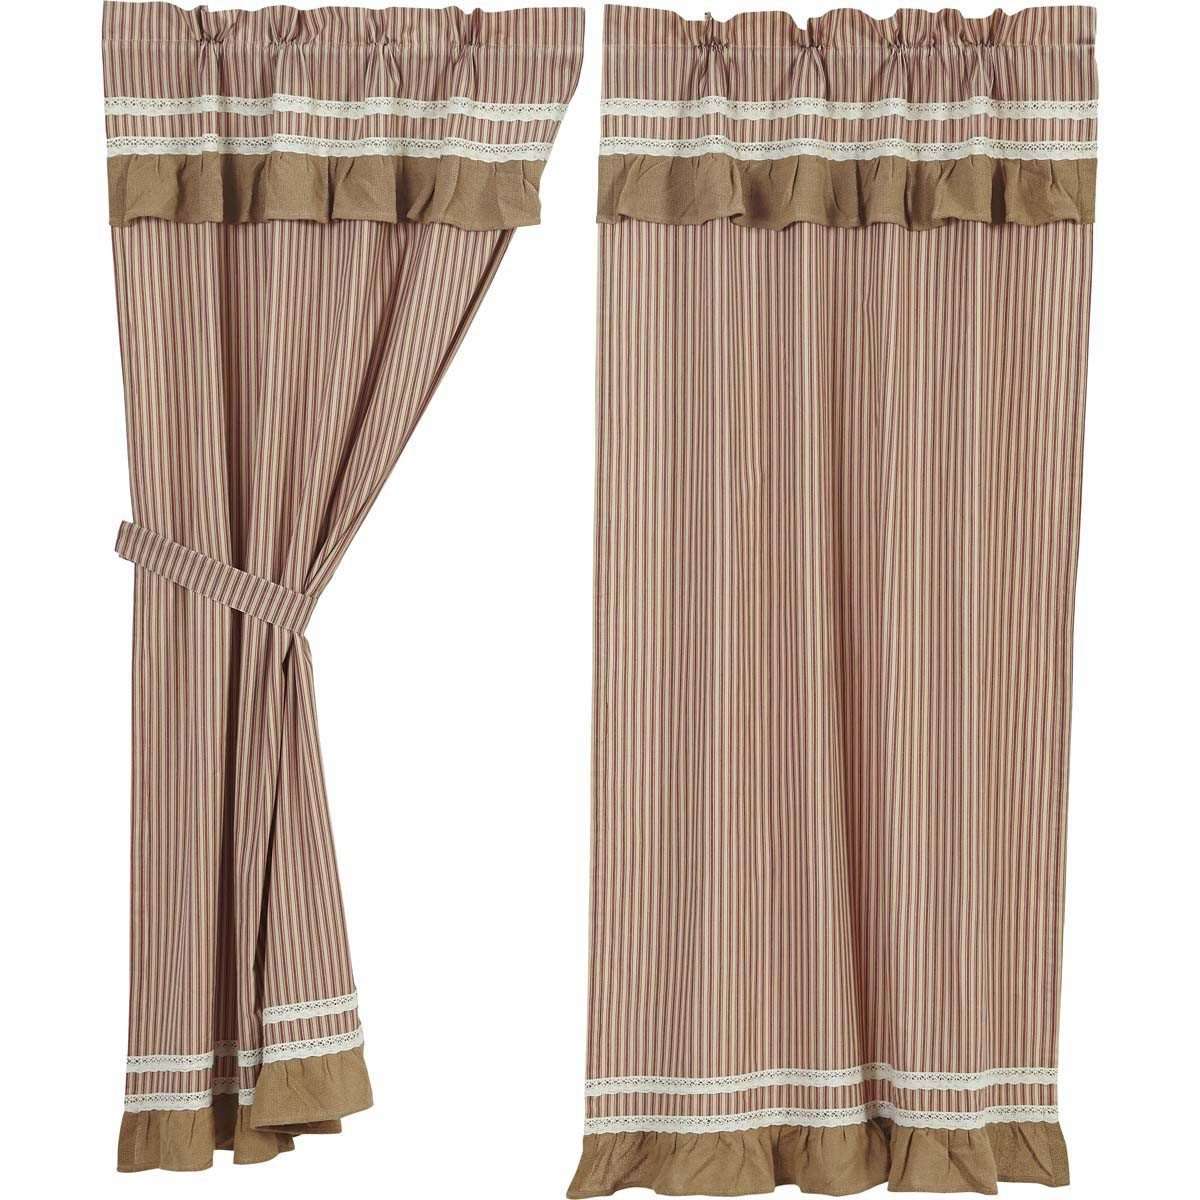 Kendra Stripe Red Short Panel Curtain Set of 2 63"x36" VHC Brands - The Fox Decor